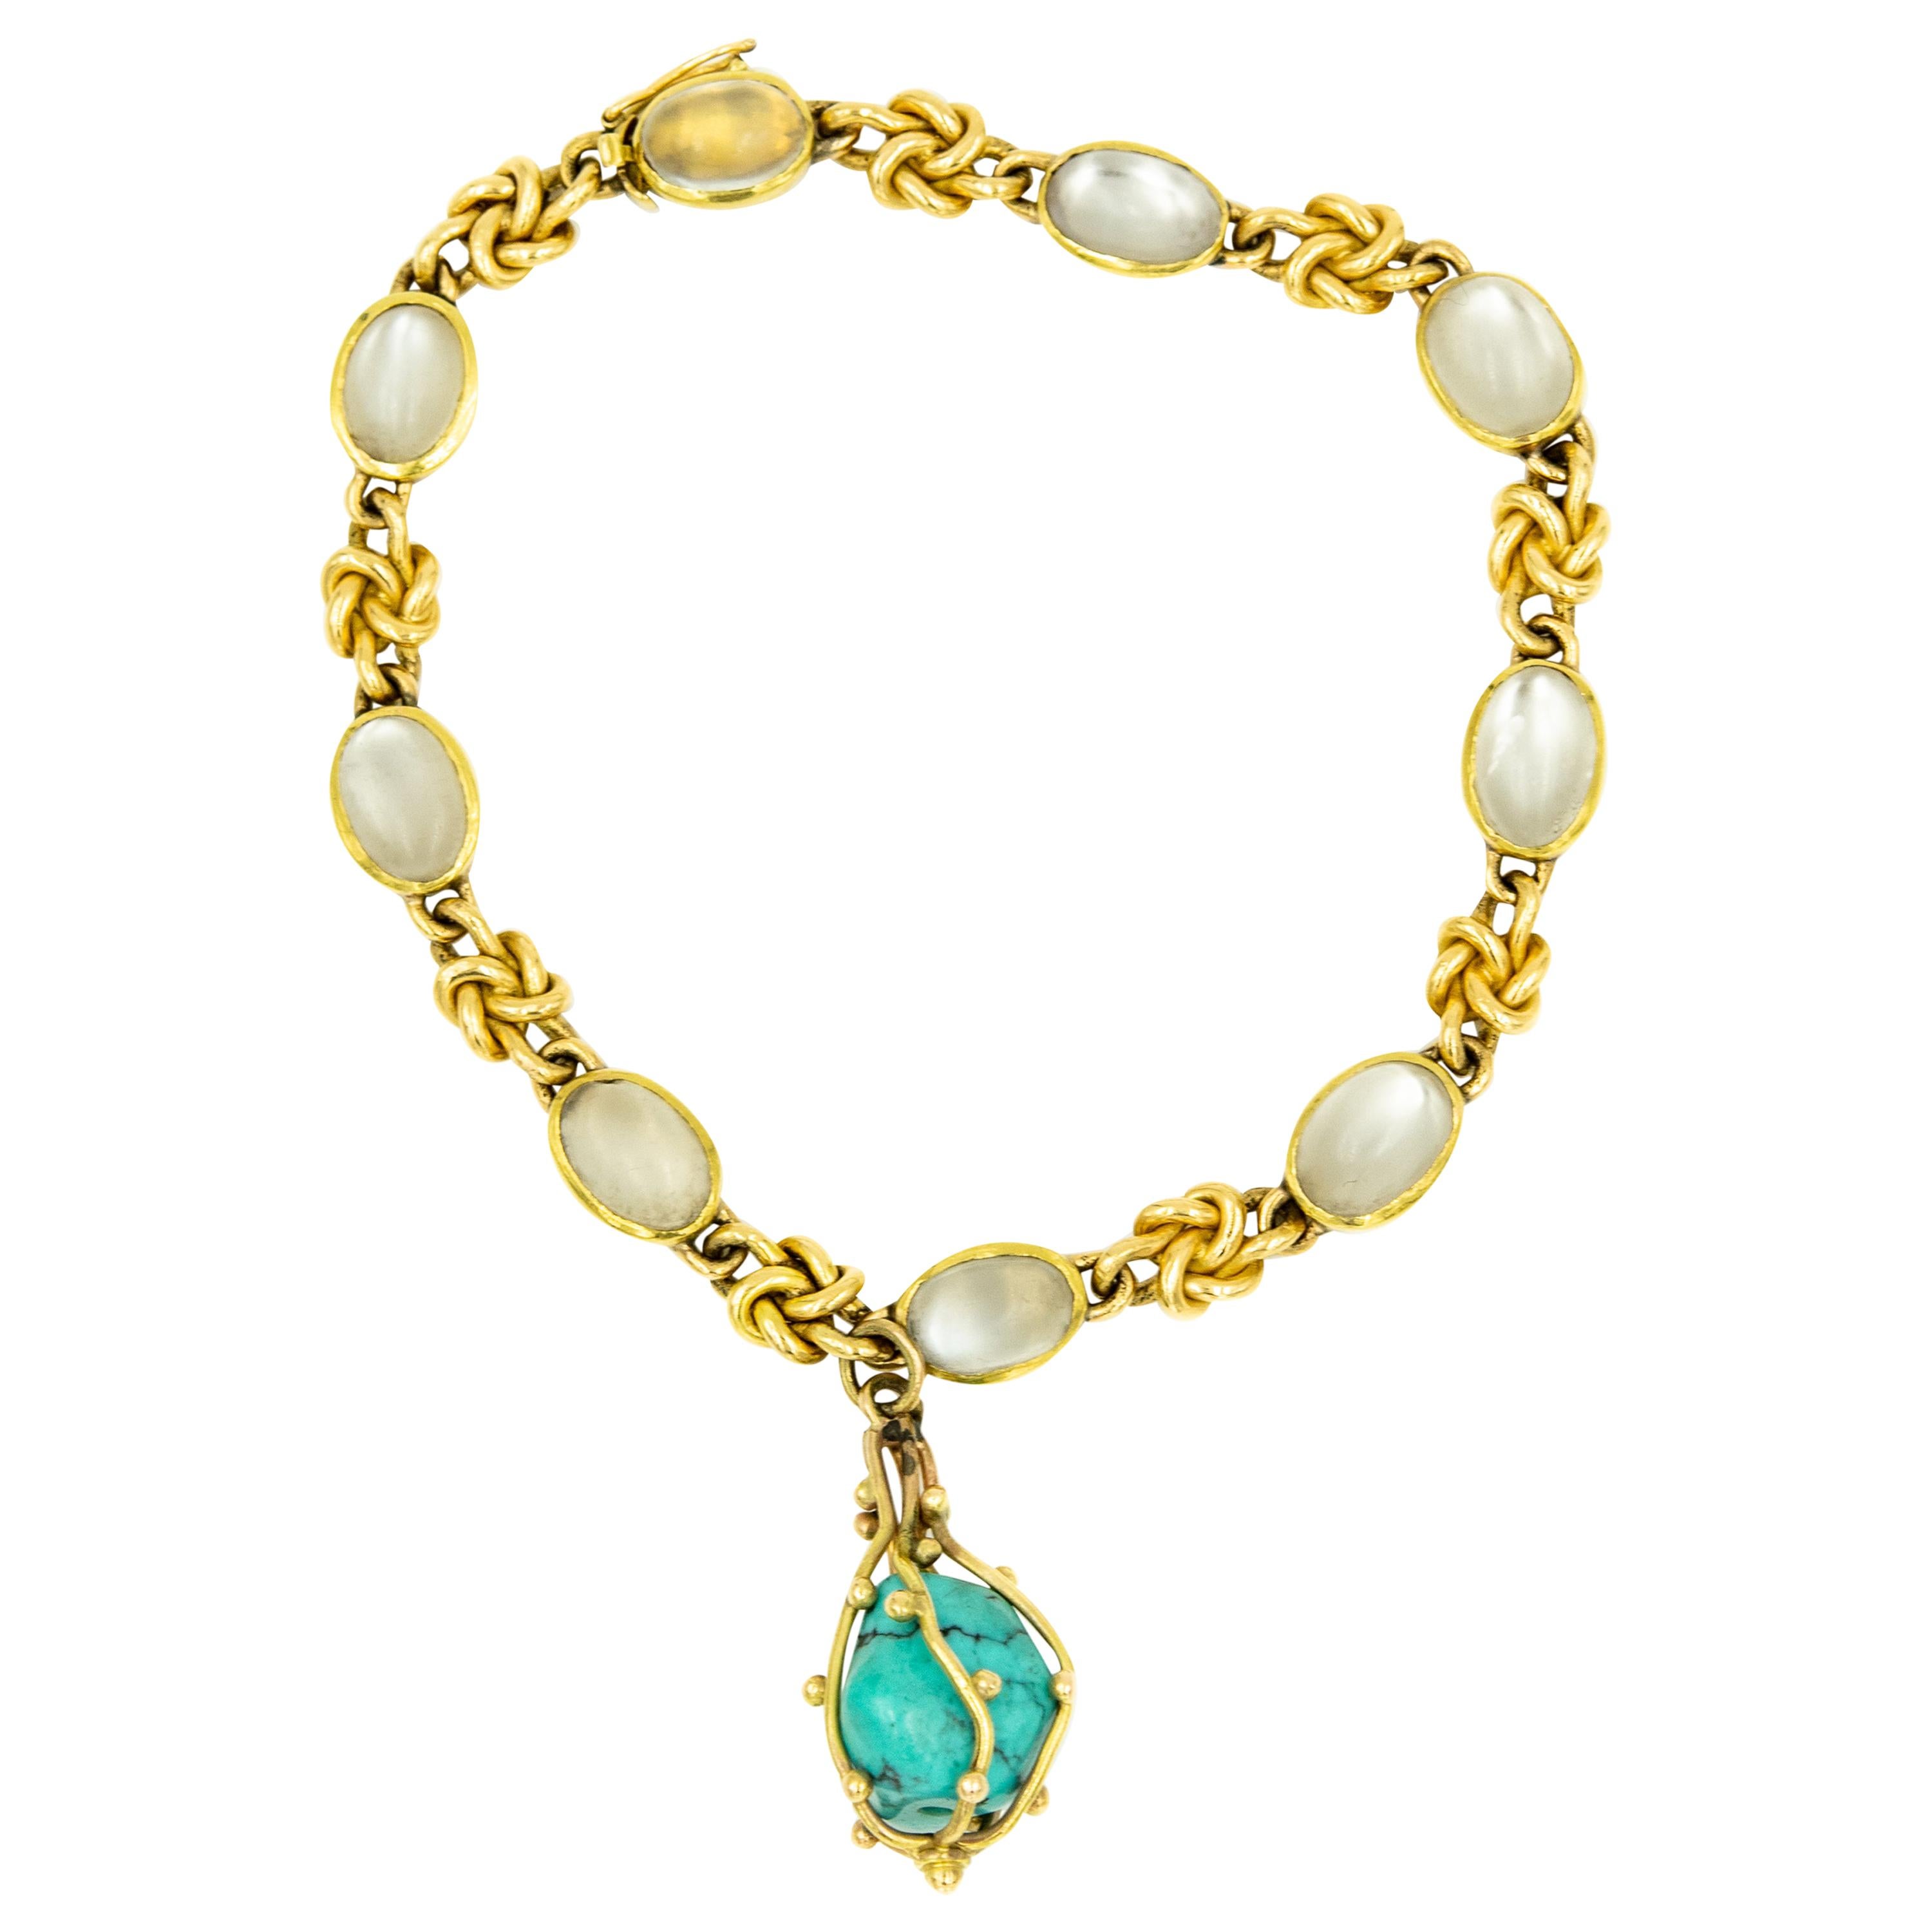 Moonstone and Turquoise Yellow Gold Knot Bracelet